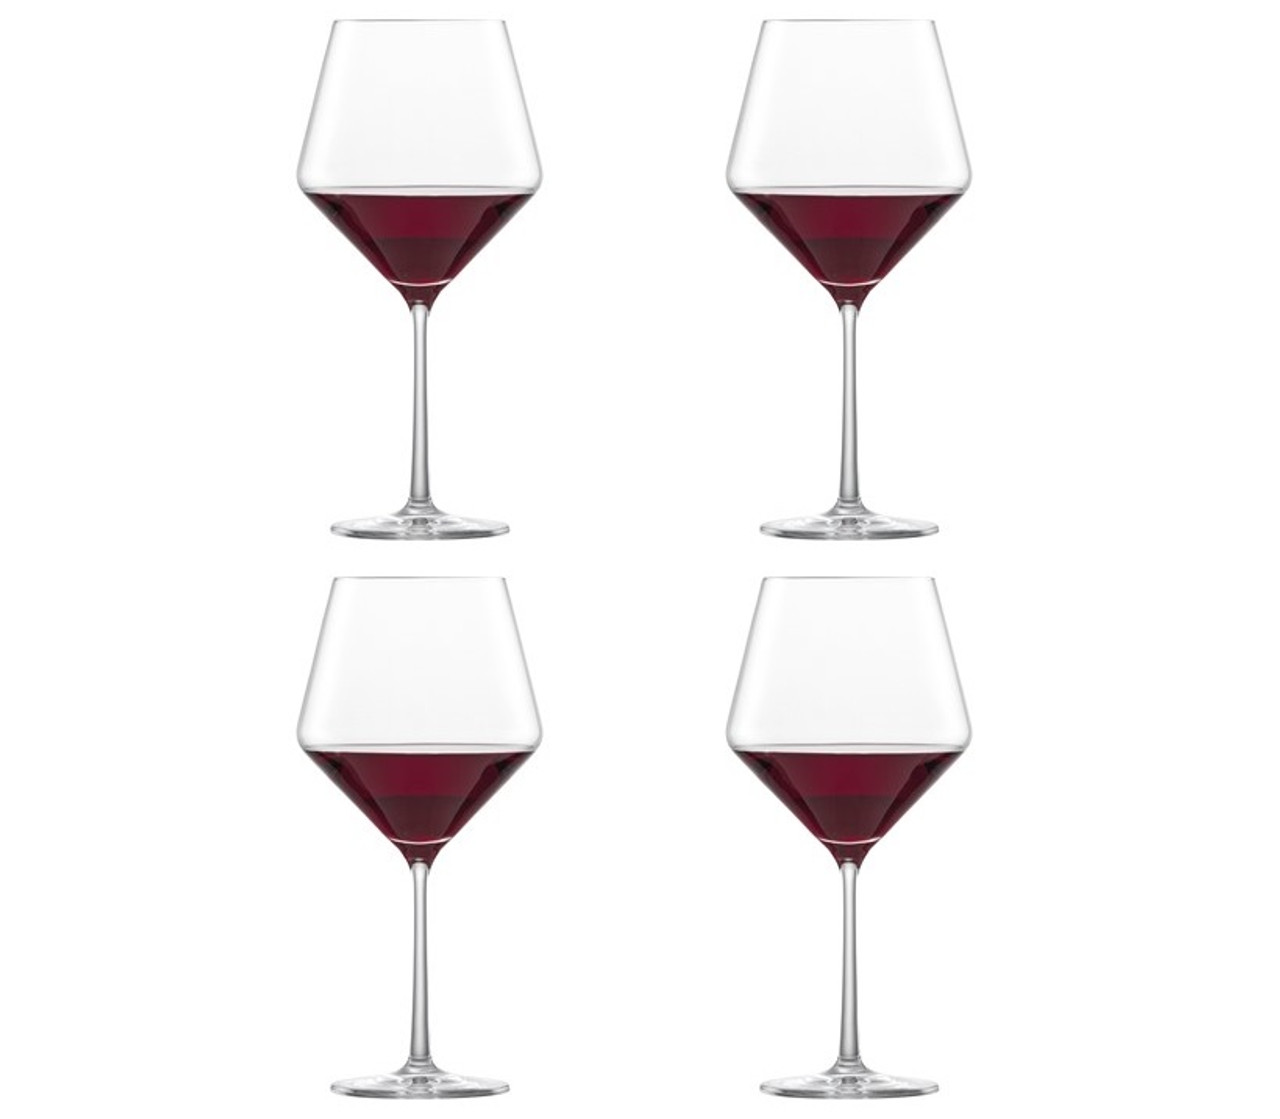 https://cdn11.bigcommerce.com/s-9mnzpxwffi/images/stencil/1280x1280/products/496/2731/Large_Crystal_Stem_Red_Wine_Glasses_Set_of_4__36409.1701076830.jpg?c=2